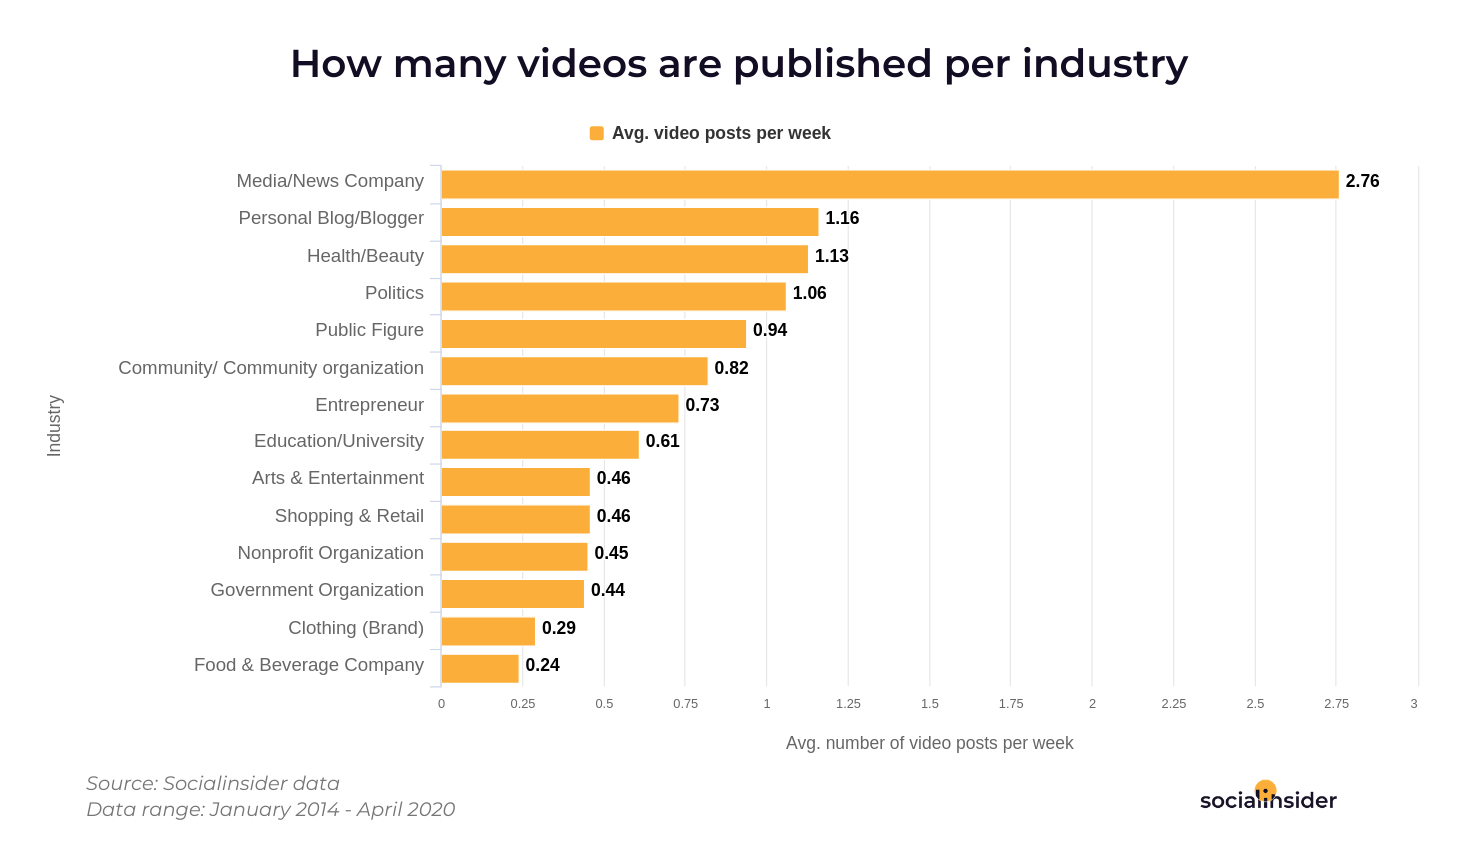 Industries who post the most videos